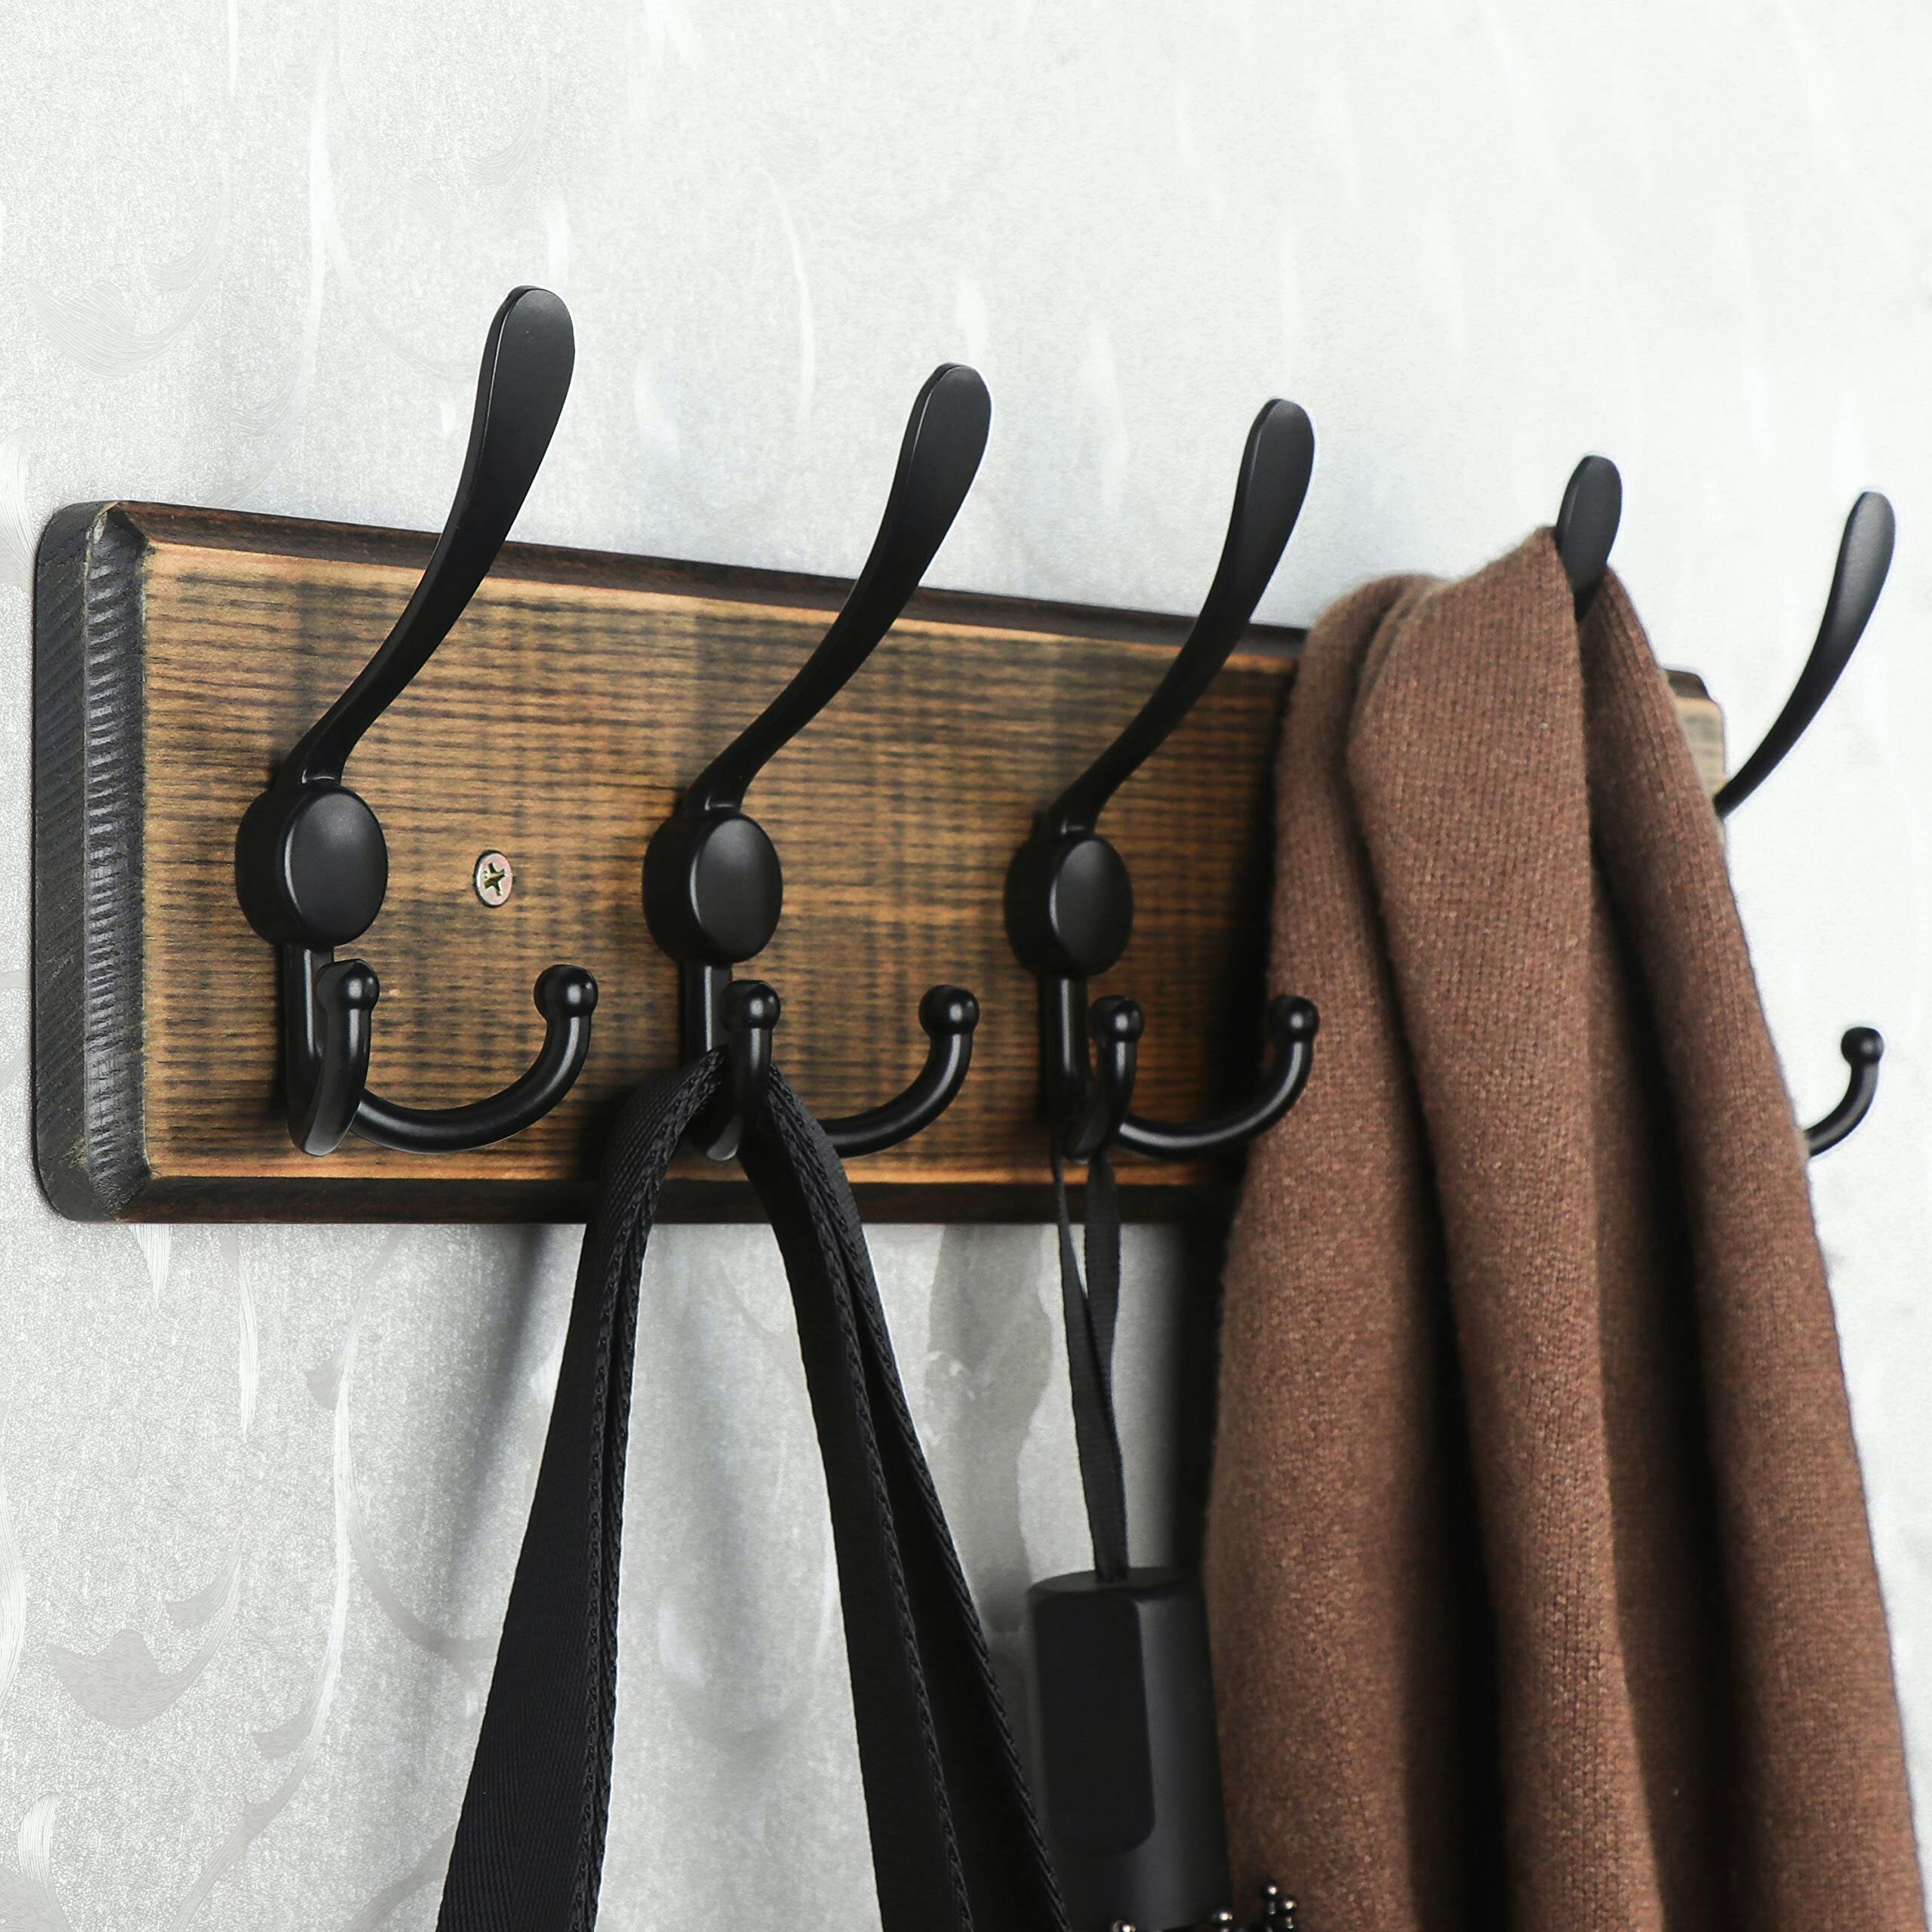 Robe Hook Wall Mounted Coat Rack Hat Clothes Hanging Hanger Wooden